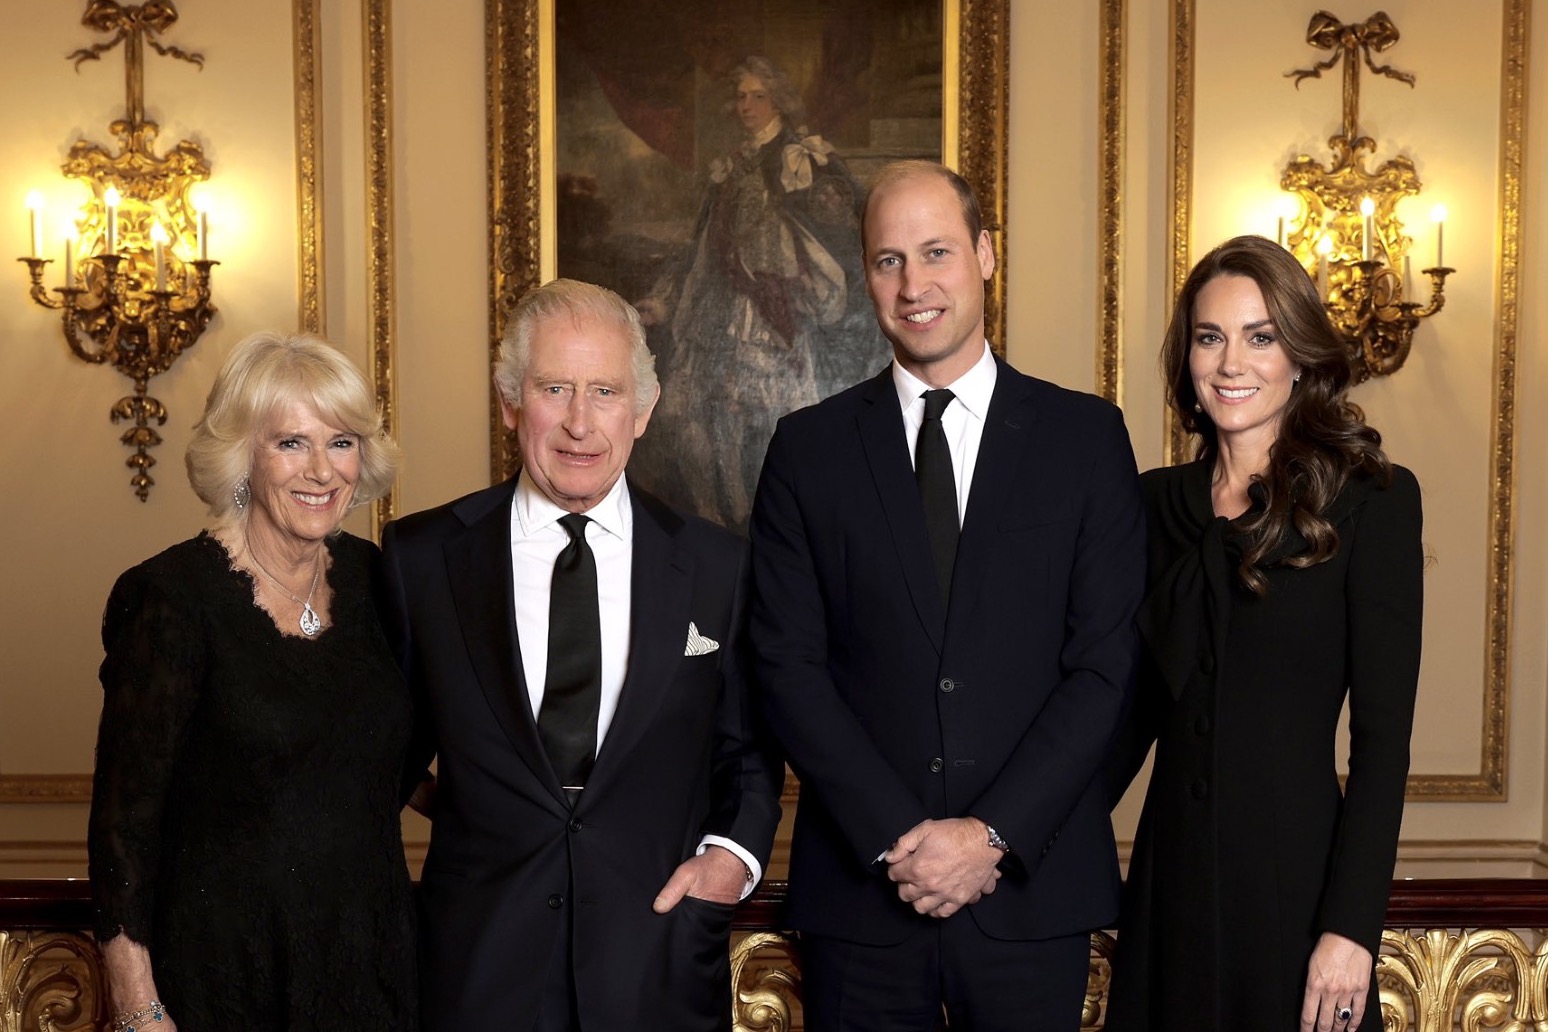 Smiling Charles, William, Camilla and Catherine captured in new image 